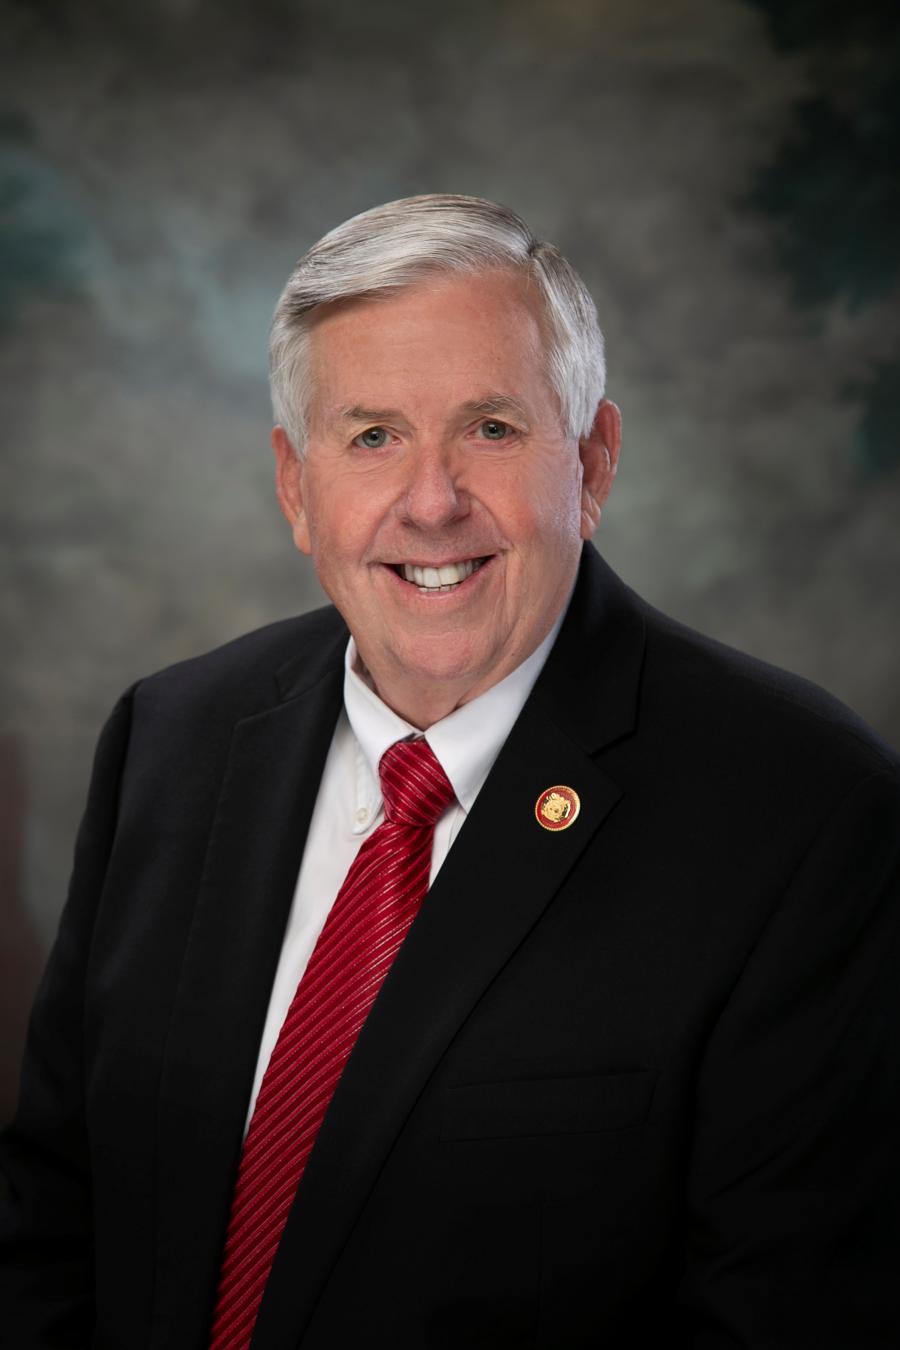 (Office of Missouri Governor Mike Parson photo)